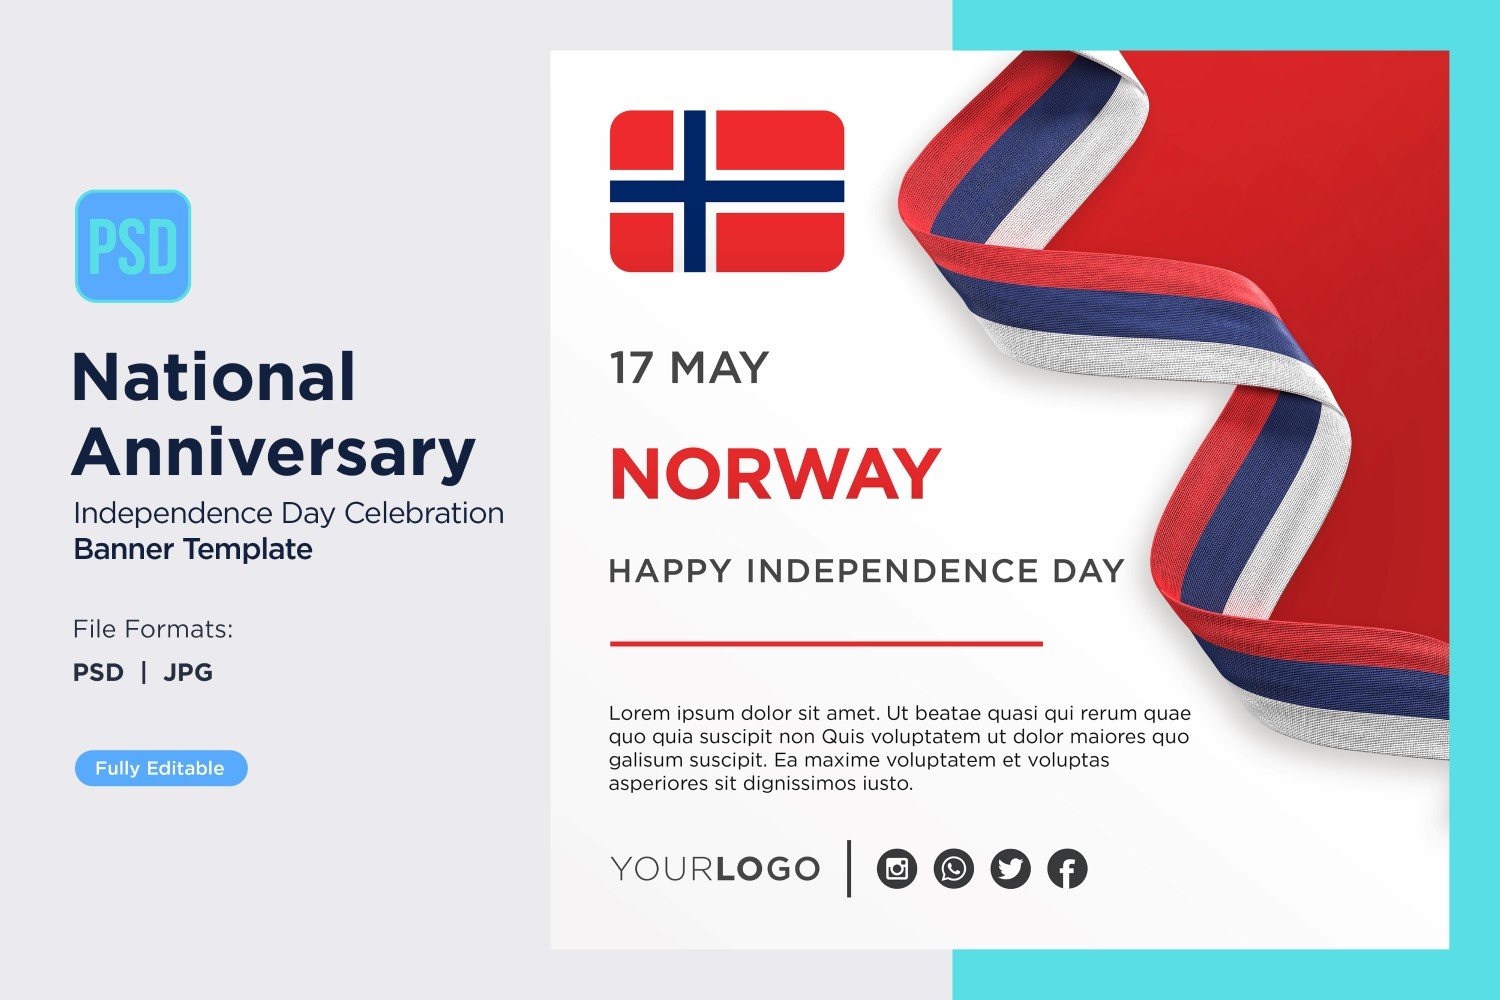 Template #402918 Day Celebration Webdesign Template - Logo template Preview